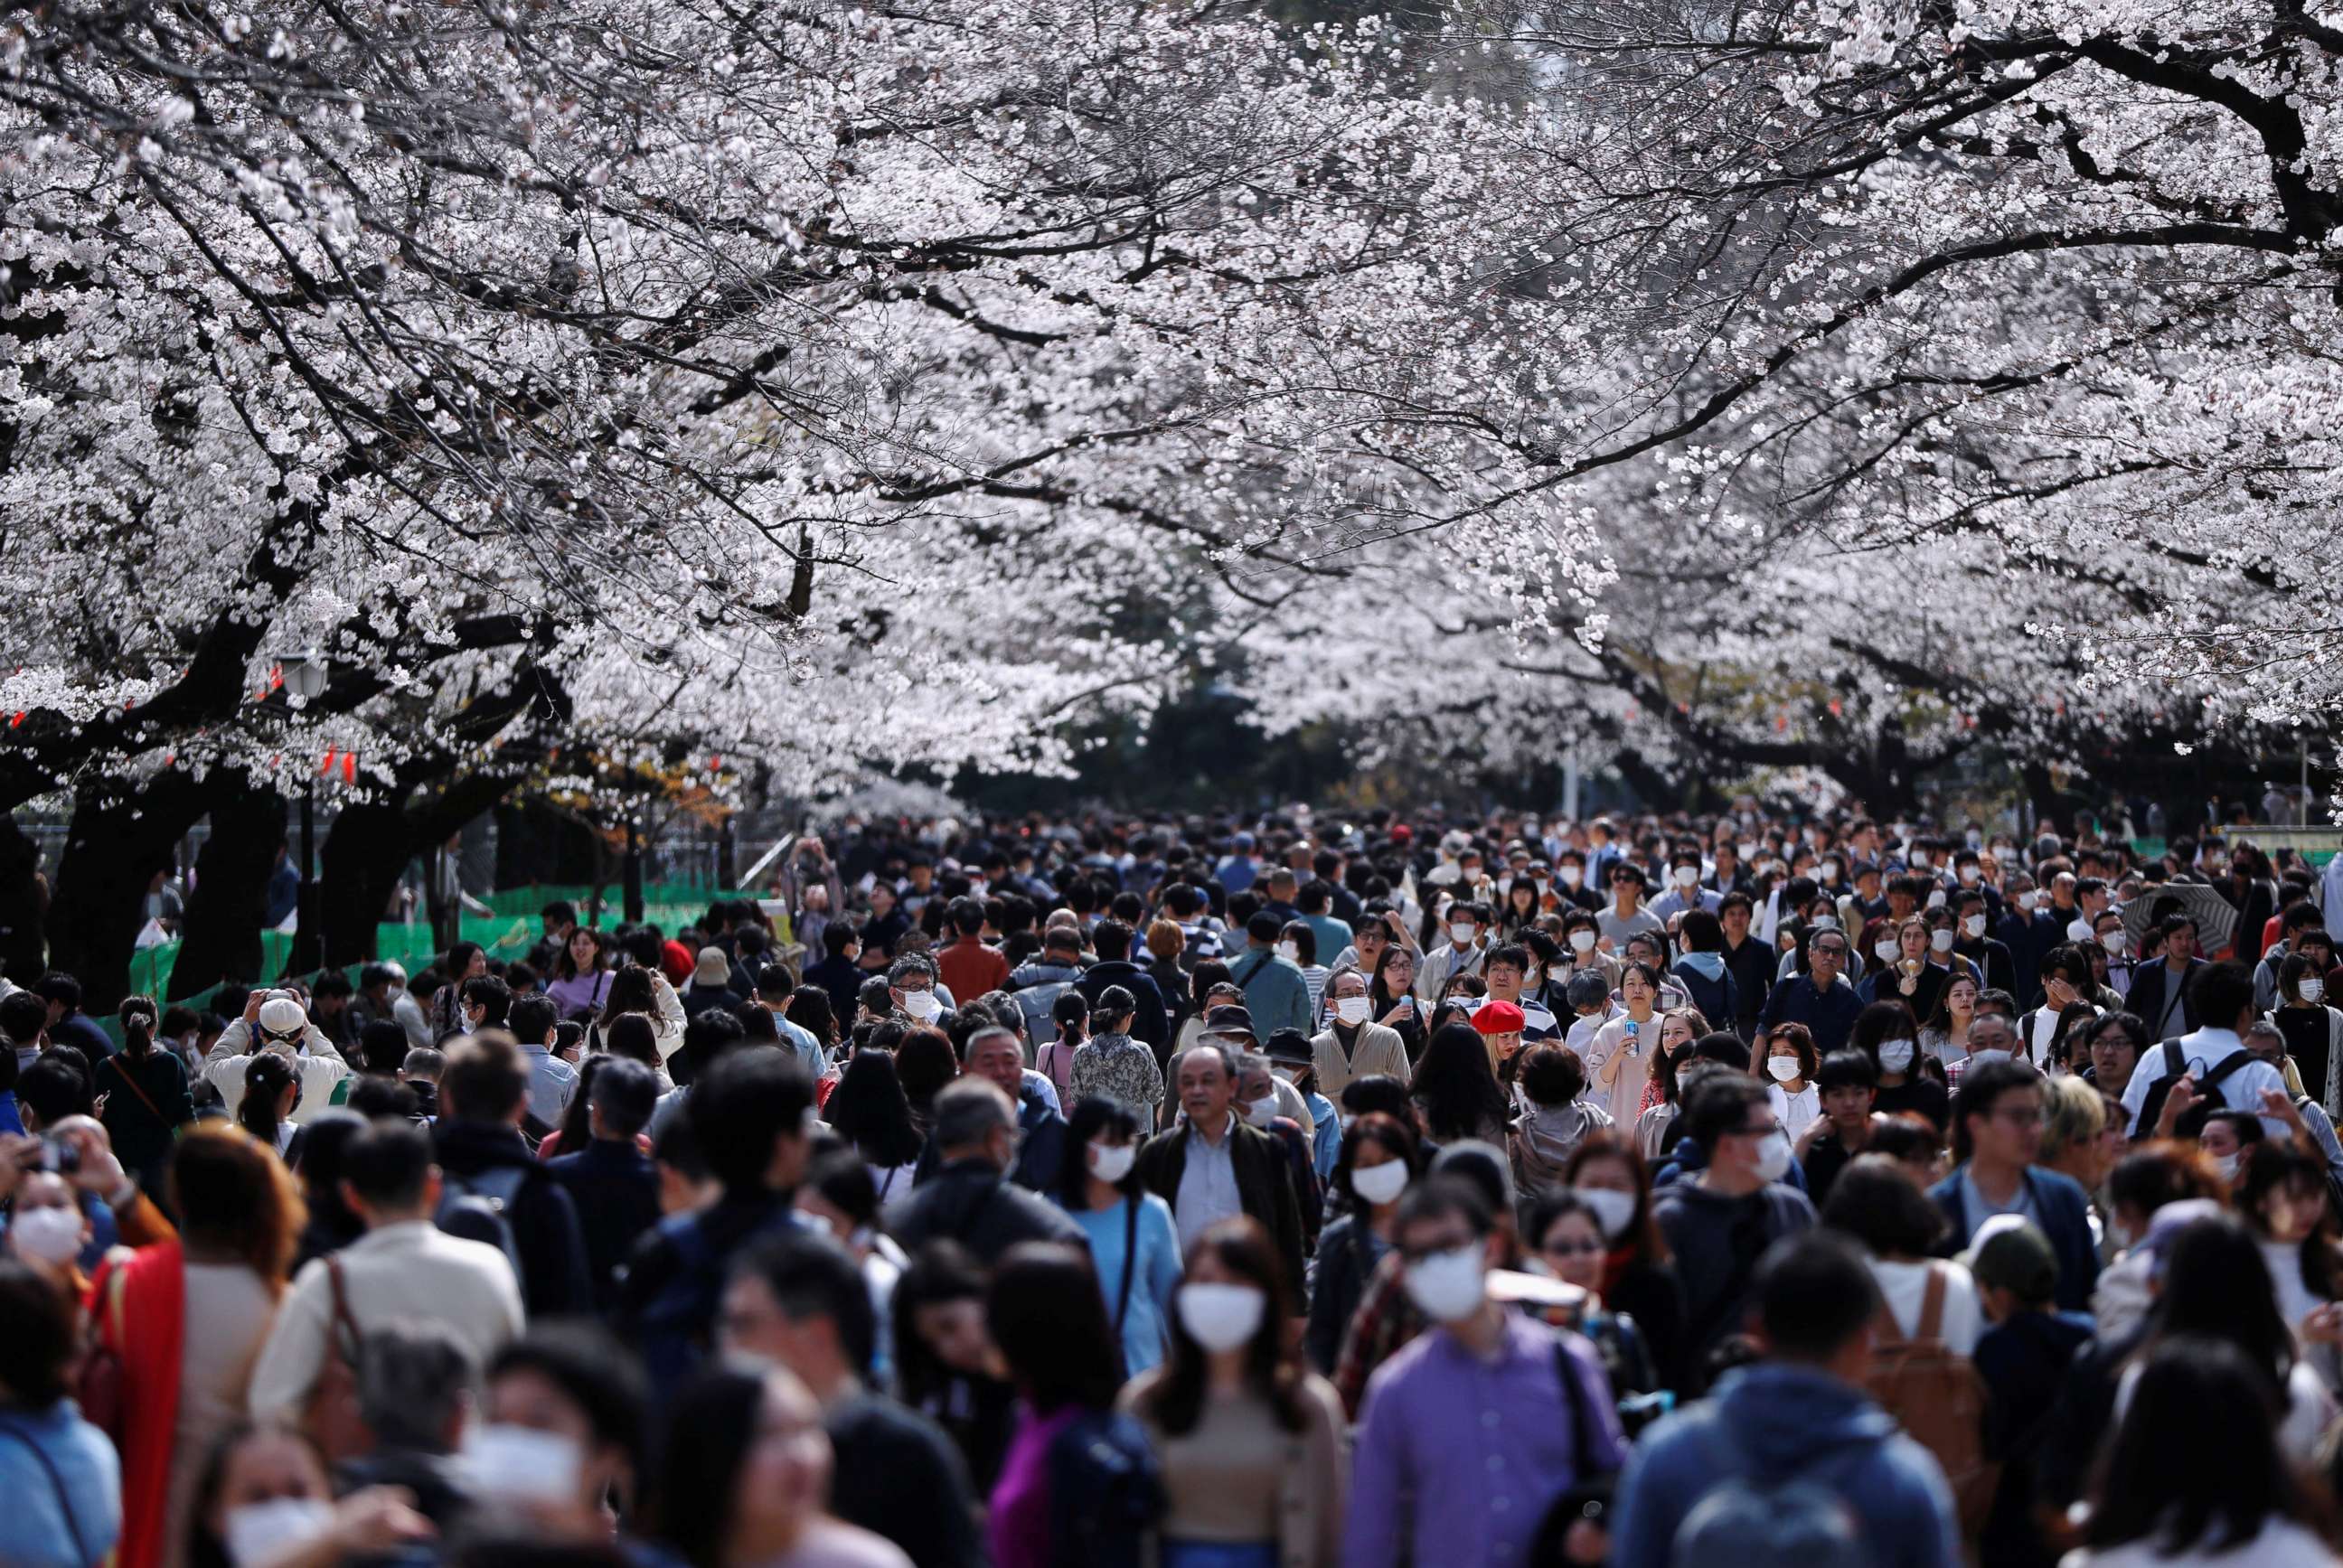 PHOTO: Visitors wearing protective face masks amid an outbreak of the novel coronavirus look at blooming cherry blossoms at Ueno park in Tokyo, Japan, on March 22, 2020.